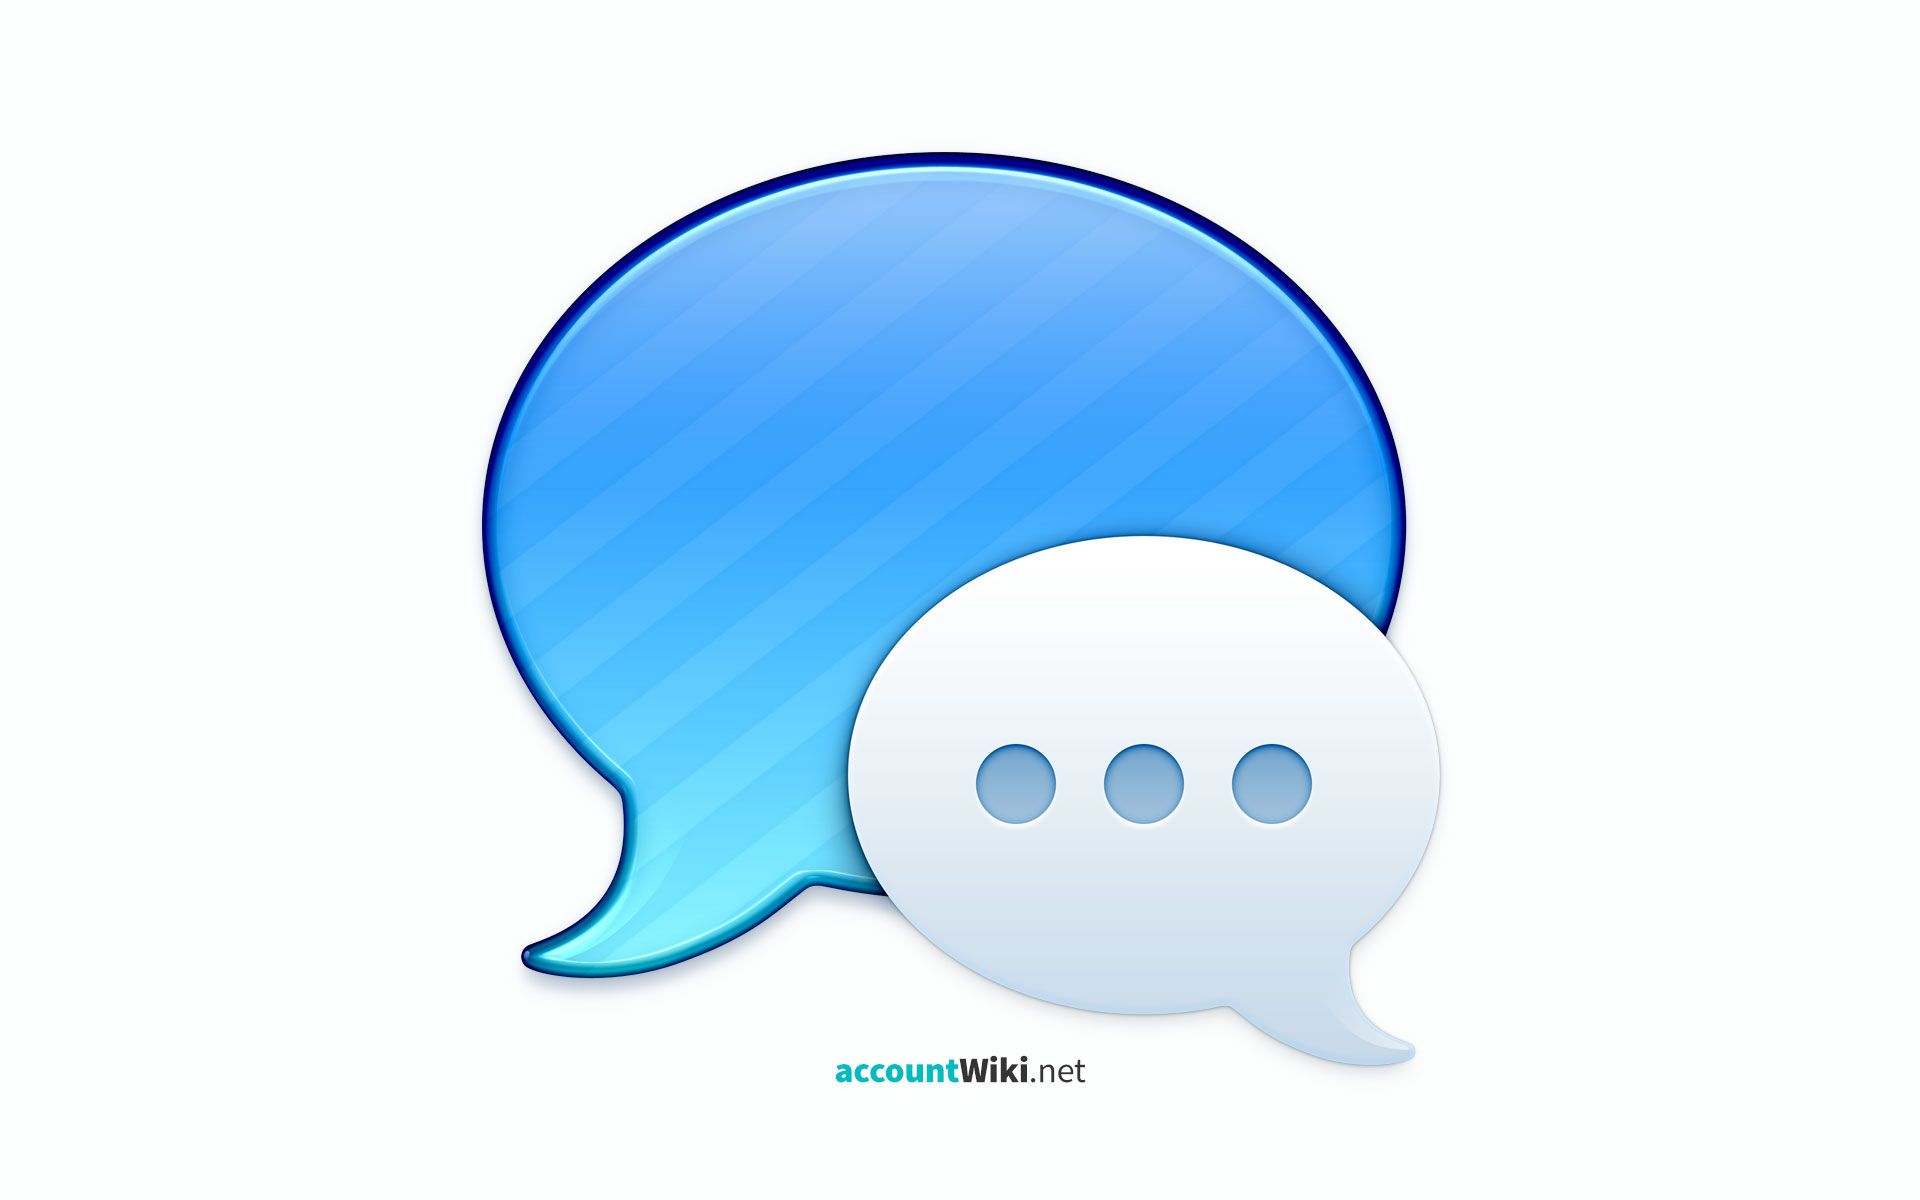 imessage for pc free download